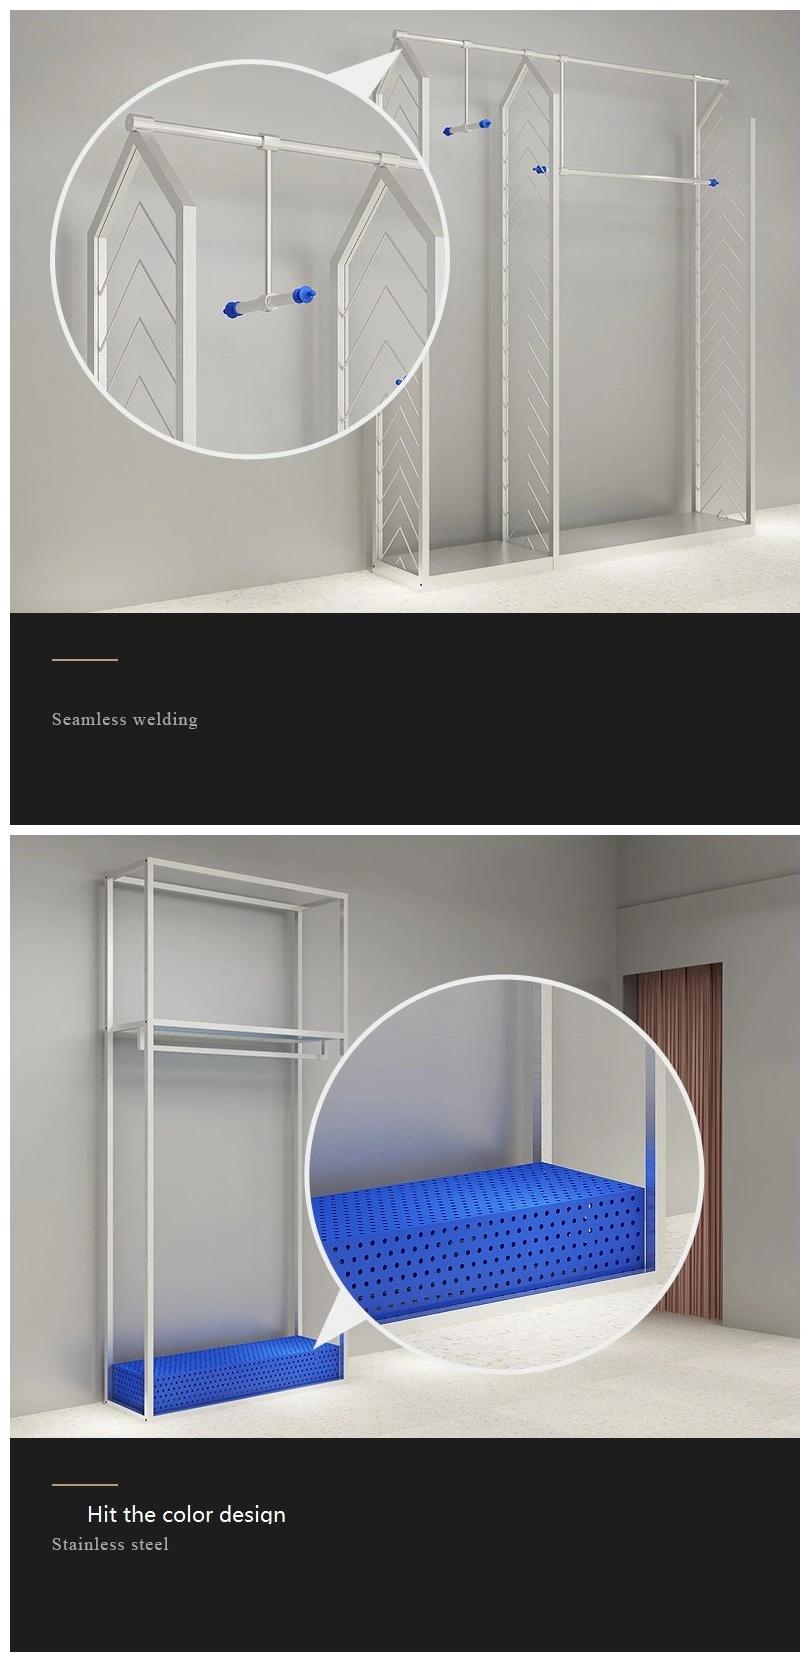 Department Shopping Mall Supply Designer Departmental Shop Project Design Retail Clothing Department Store Display Rack